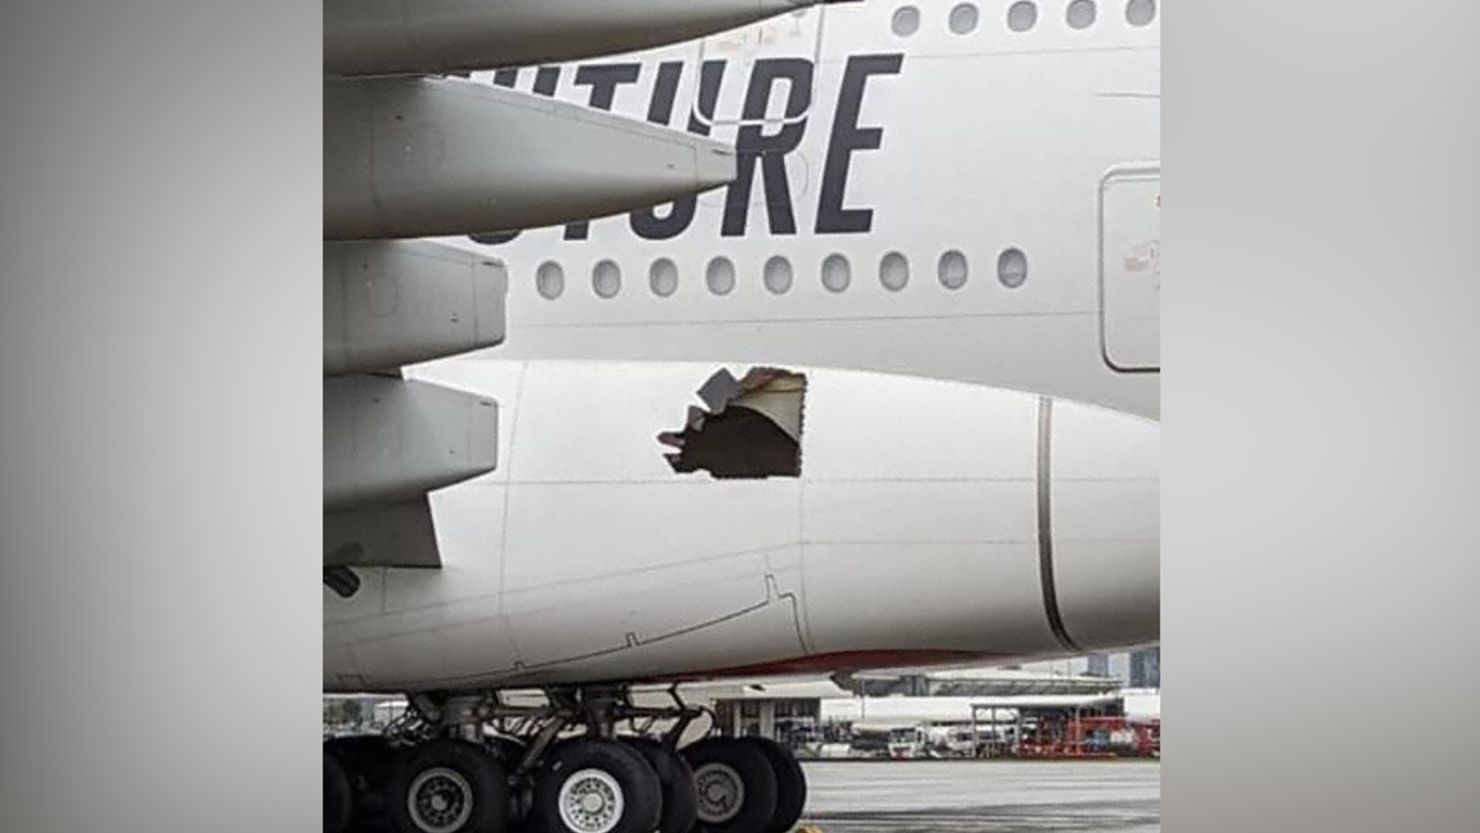 Emirates said the rupture did not impact the structure of the aircraft.  